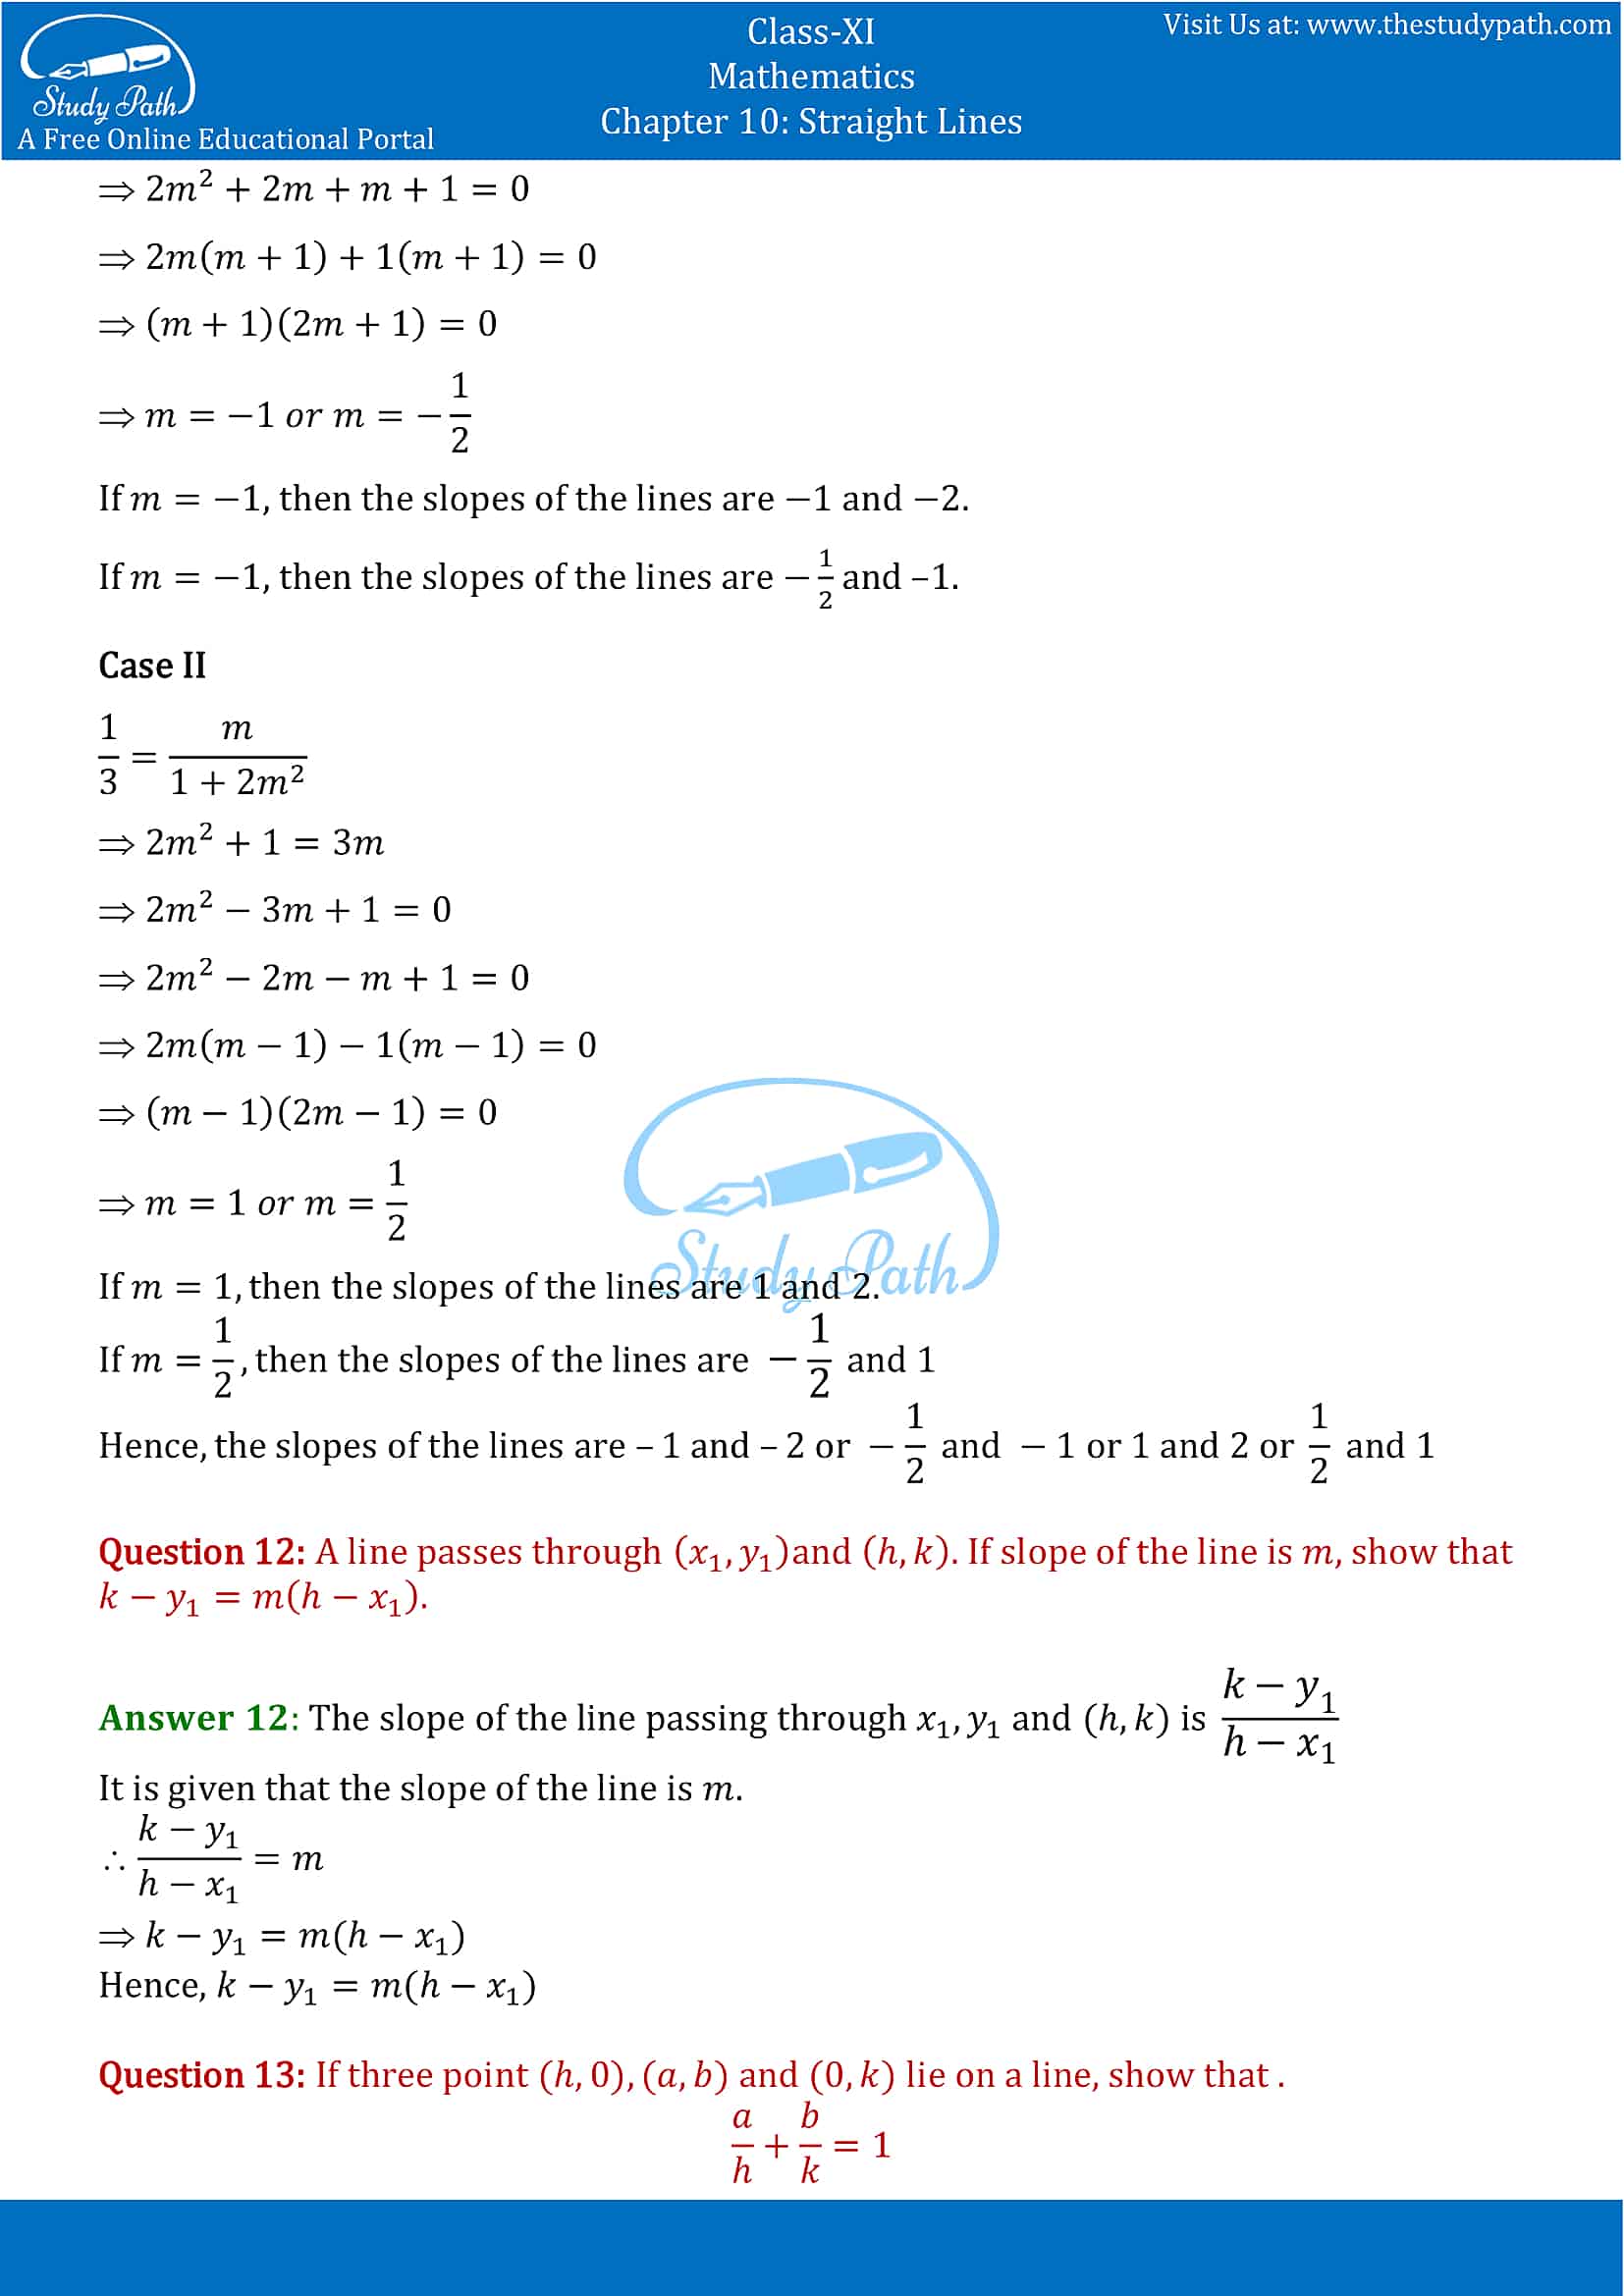 NCERT Solutions for Class 11 Maths chapter 10 Straight Lines Exercise 10.1 Part-7